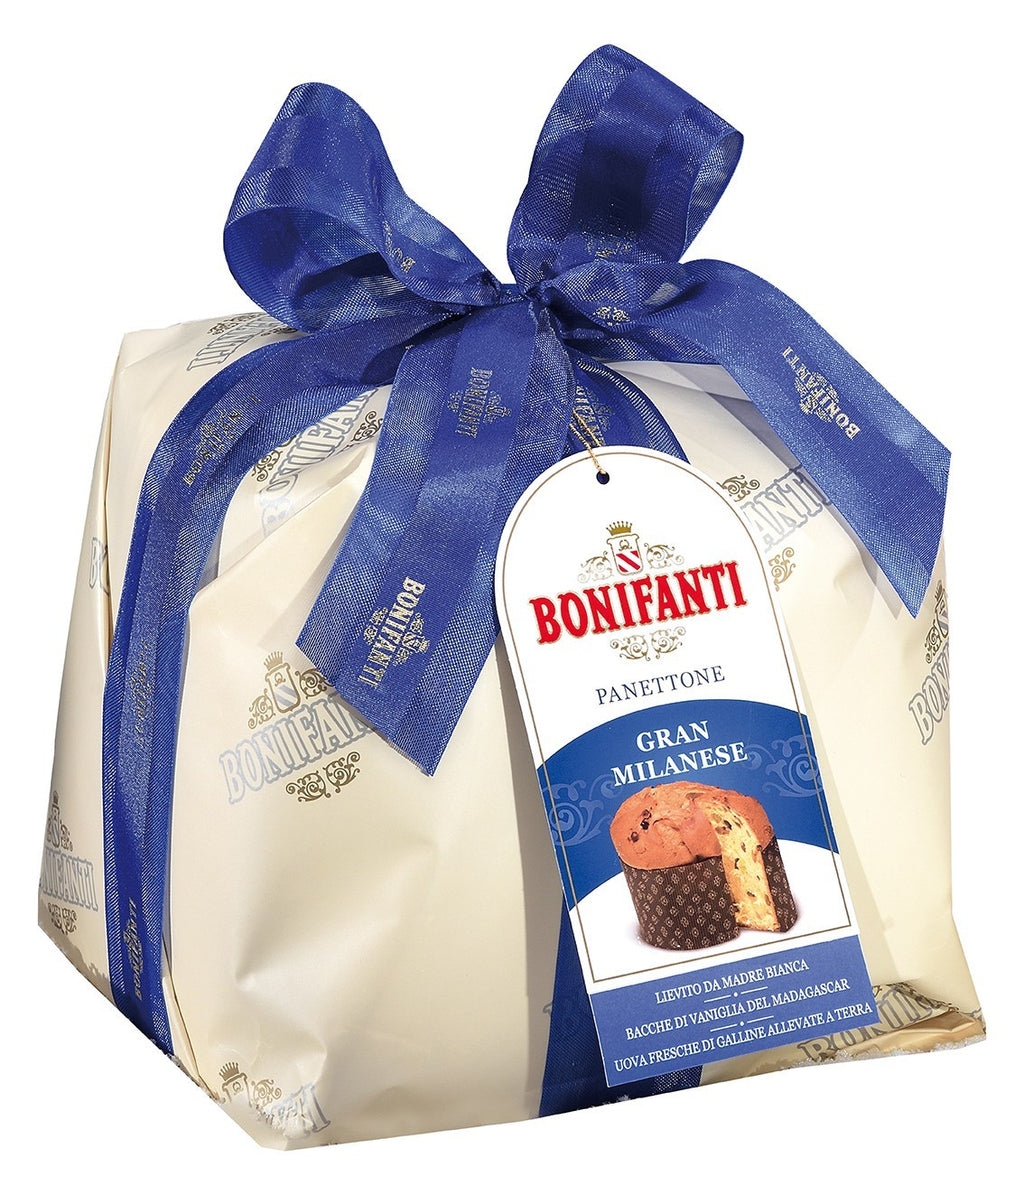 The Gran Milanese is the traditional preparation of panettone. Studded with sultana raisins and candied orange and citron peel, it's a classic Christmas treat.